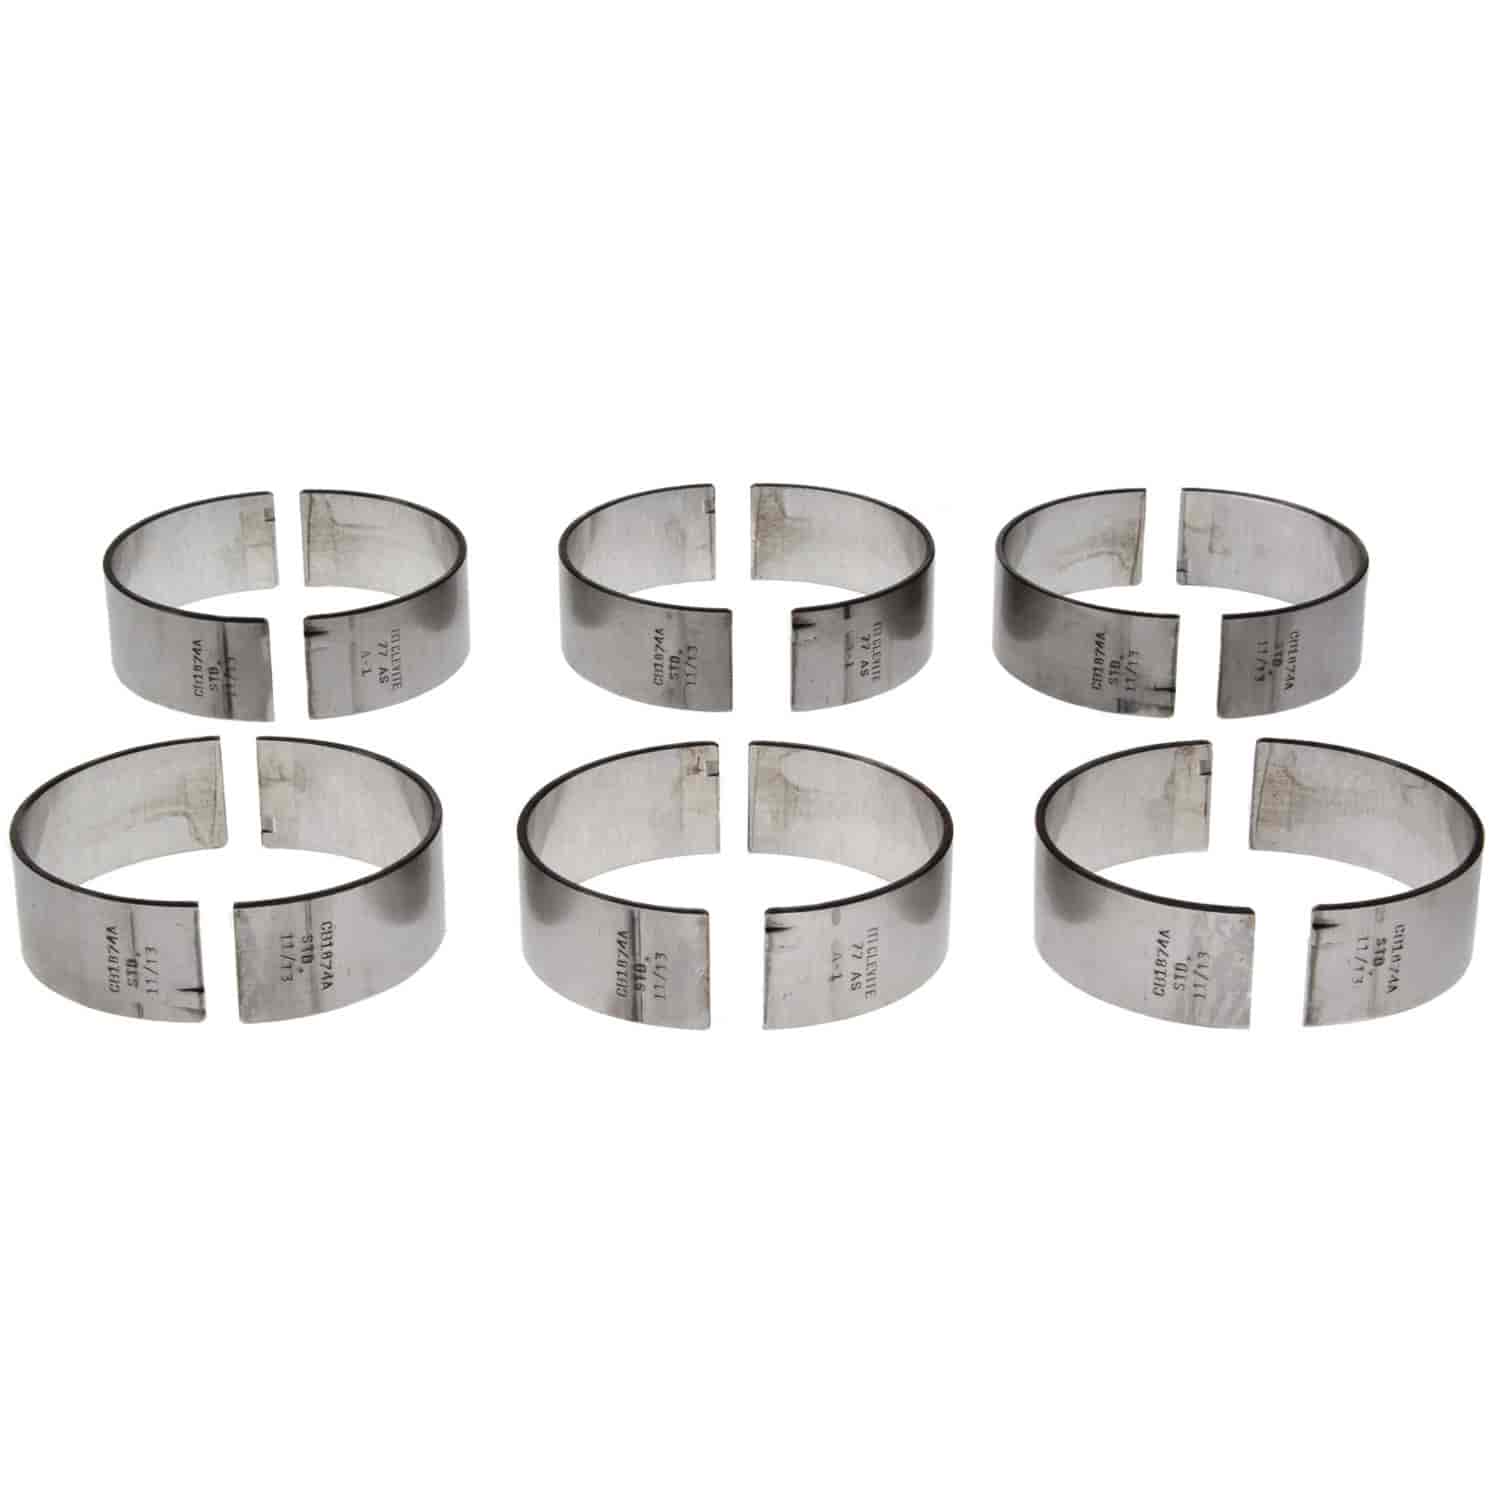 Connecting Rod Bearing Set Chevy 1985-2013 V6 4.3L with -.010" Undersize and Resized Rods